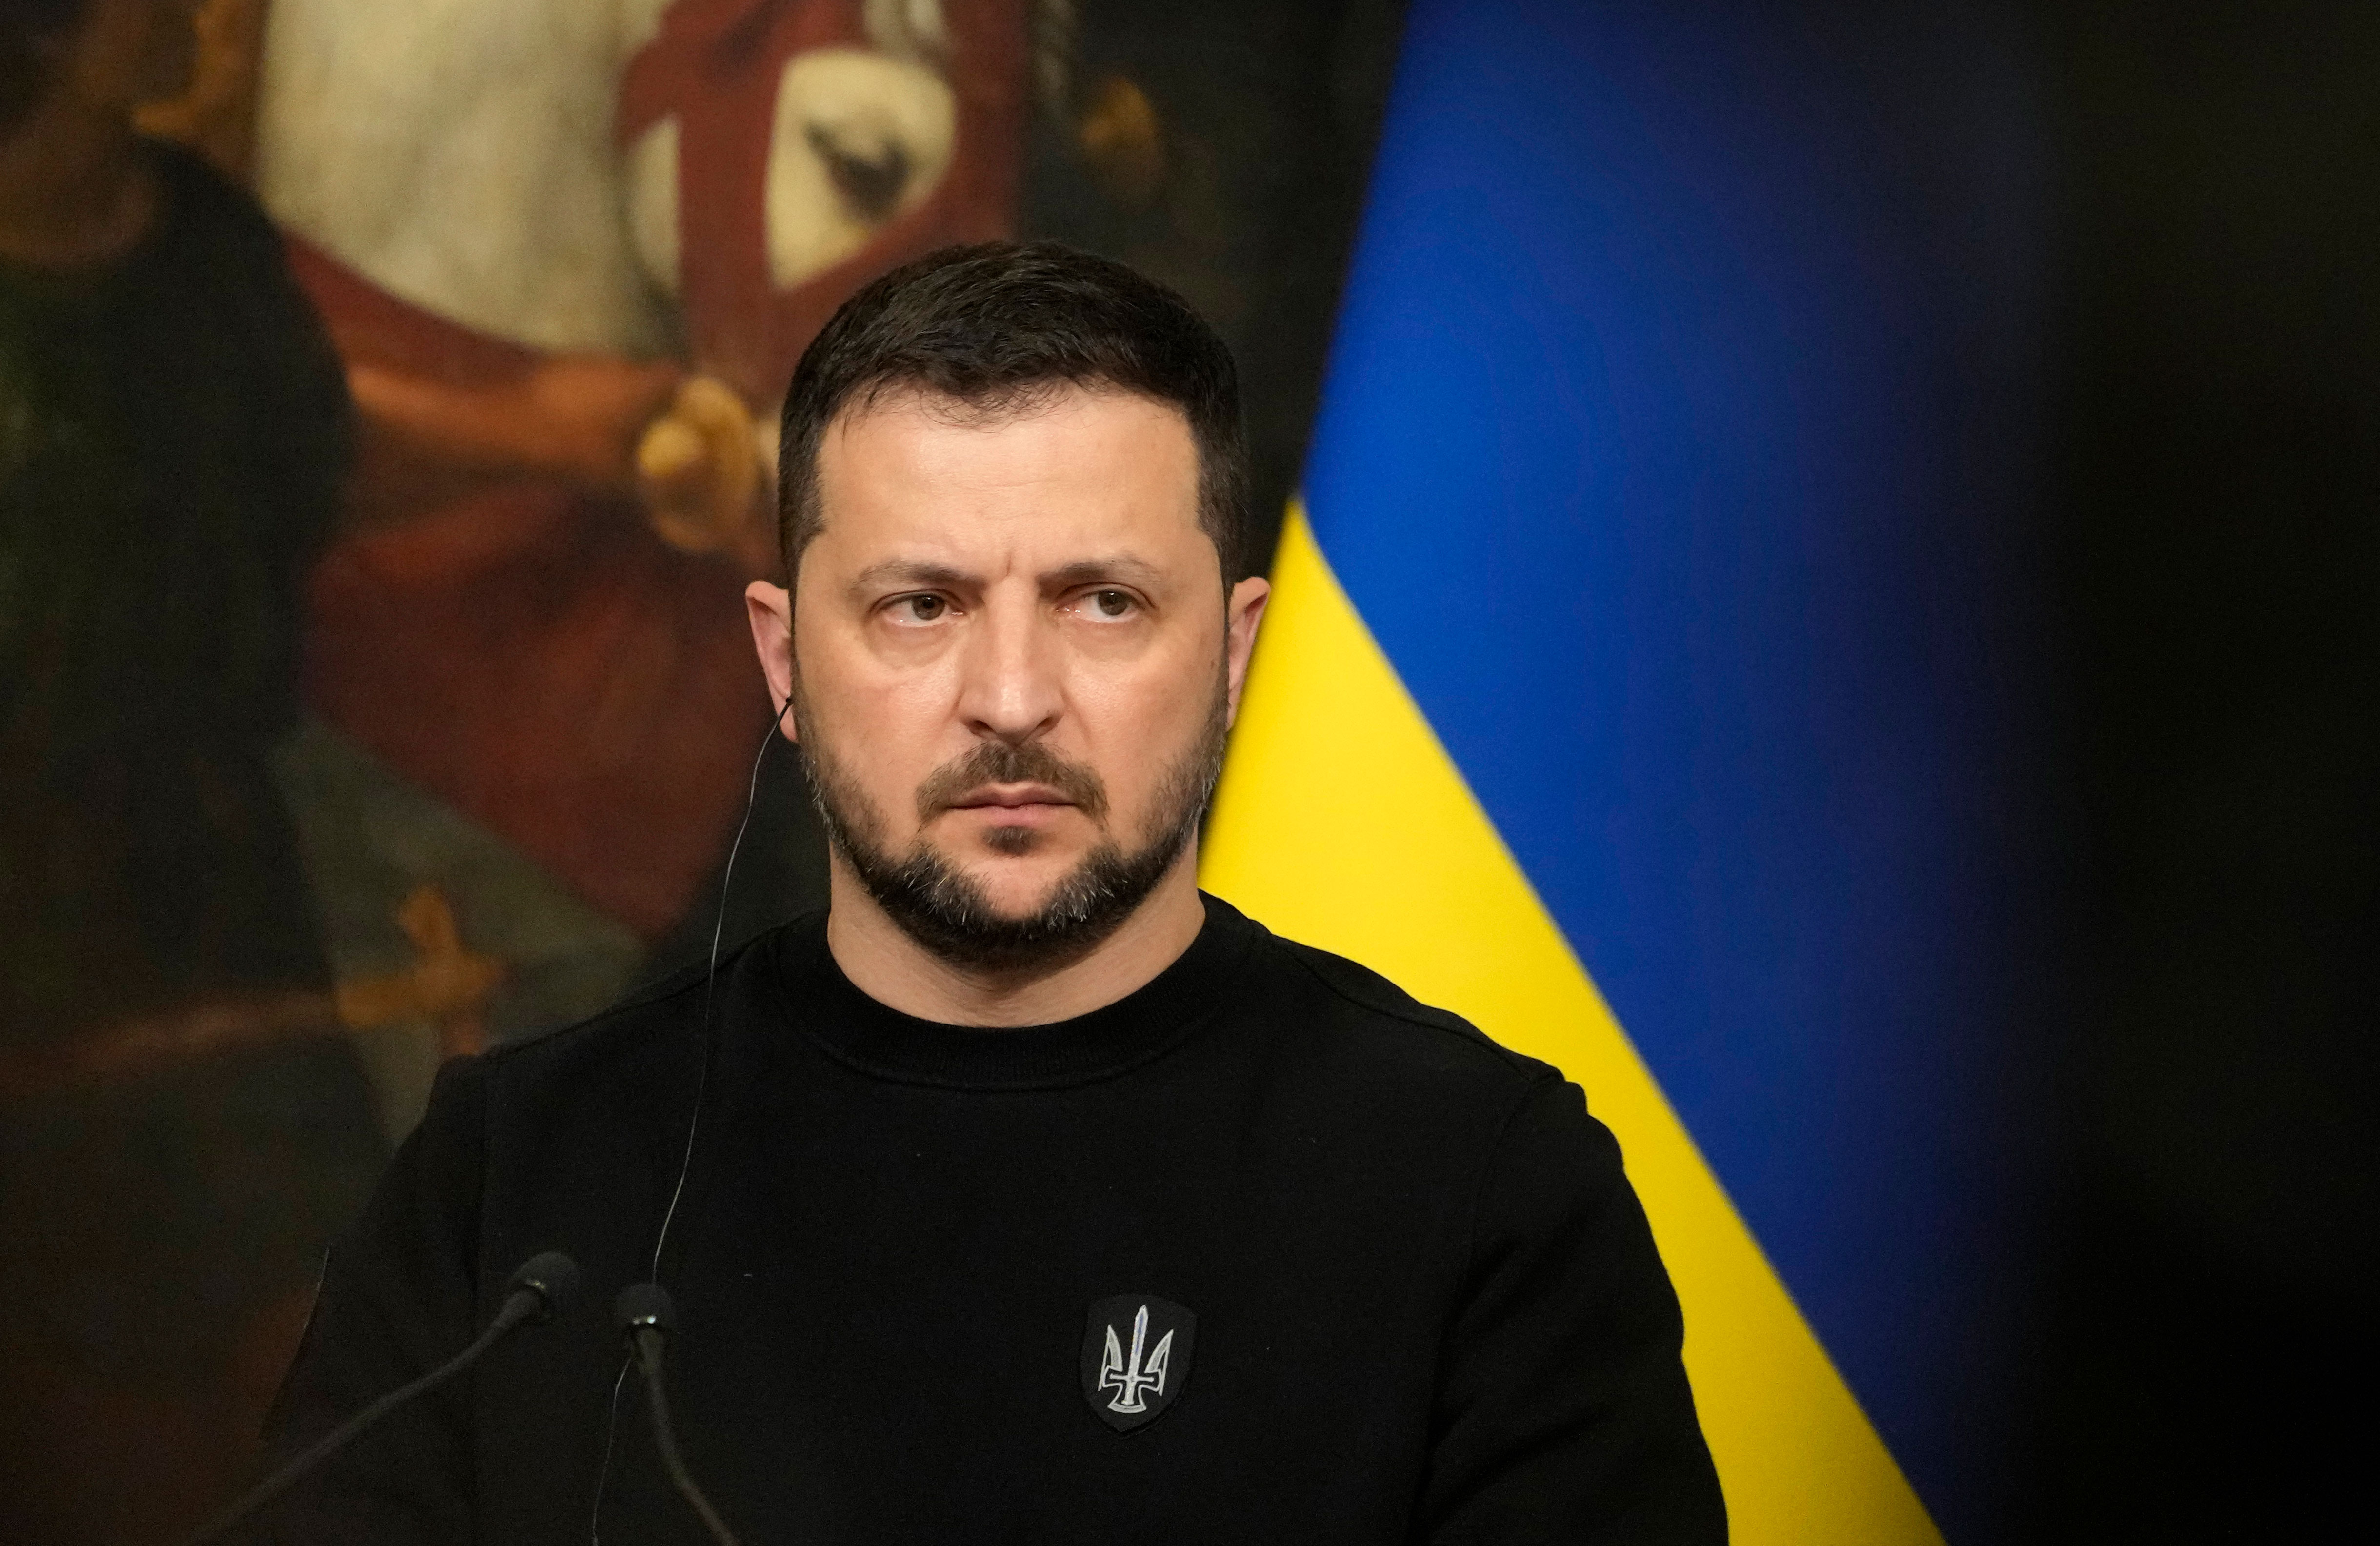 Ukrainian President Volodymyr Zelensky speaks at a press conference following a meeting with Italian Premier Giorgia Meloni at Chigi Palace in Rome on May 13. 